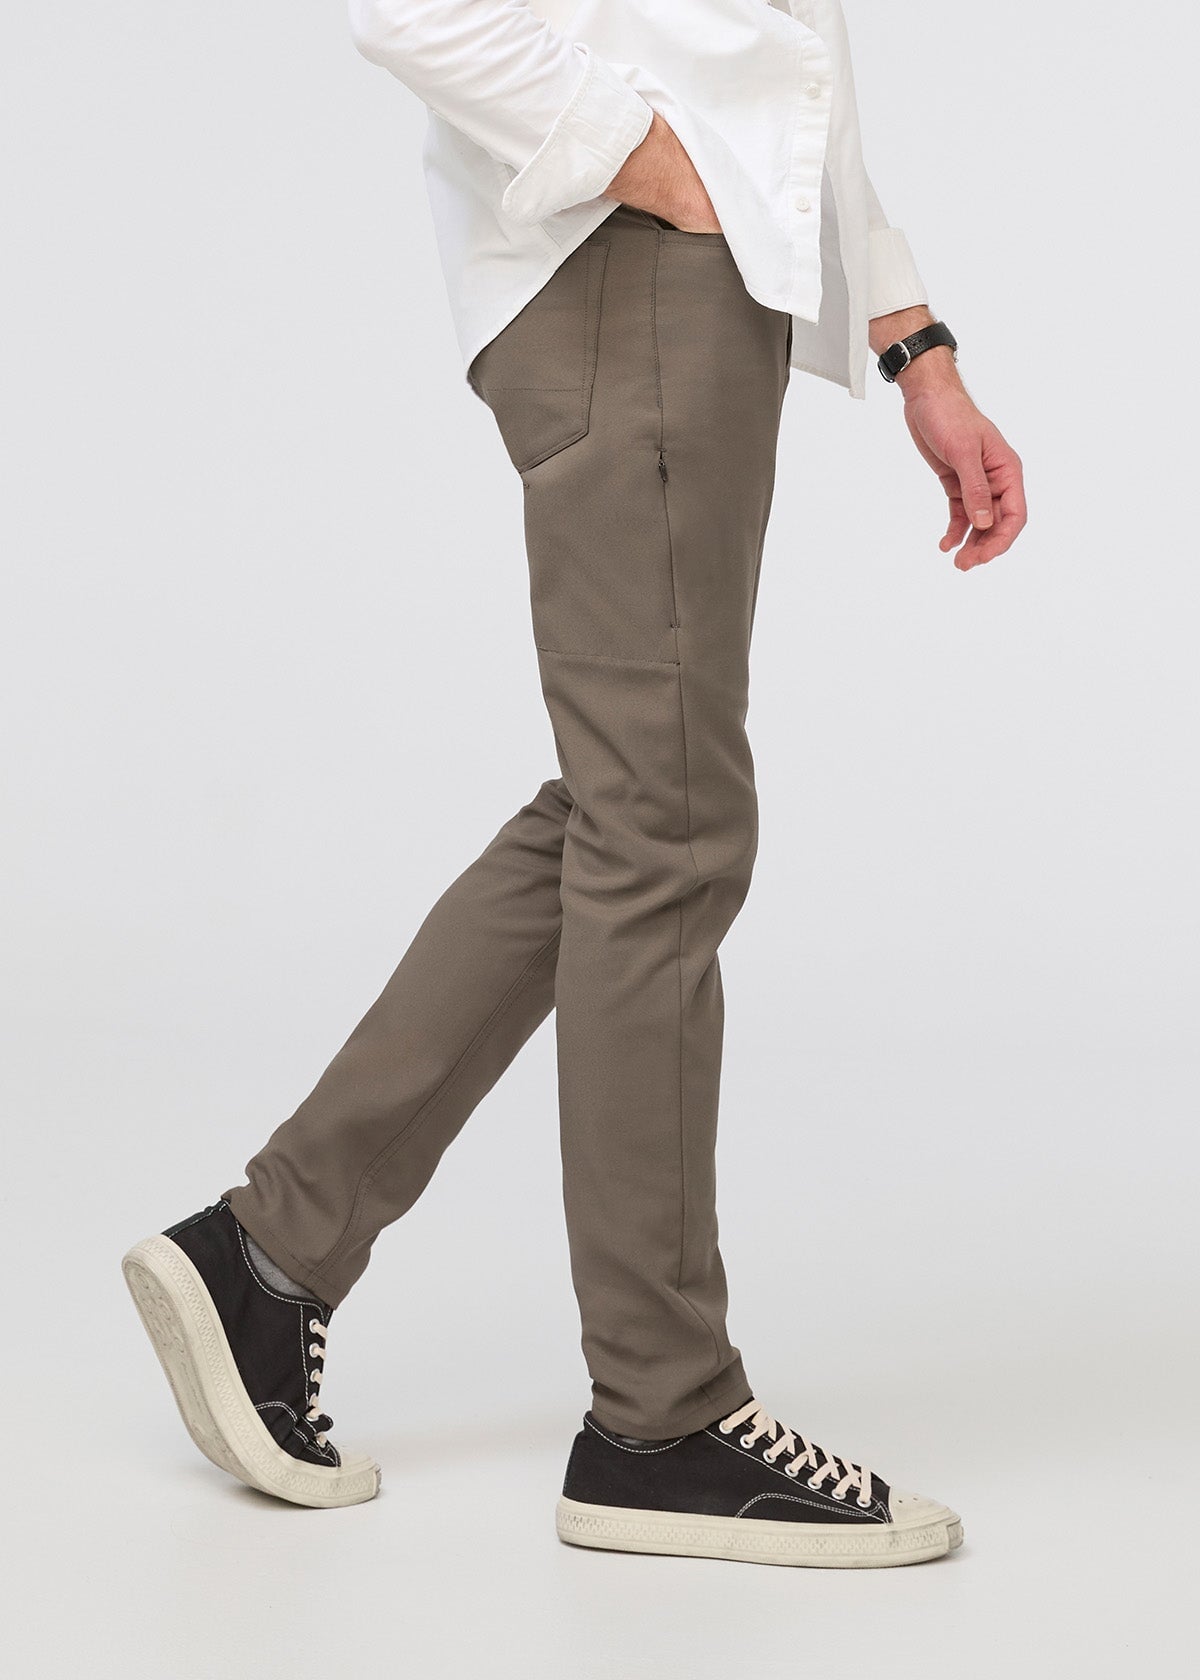 5-Pocket Stretch Twill Trousers, Clothes For Fly Fishing